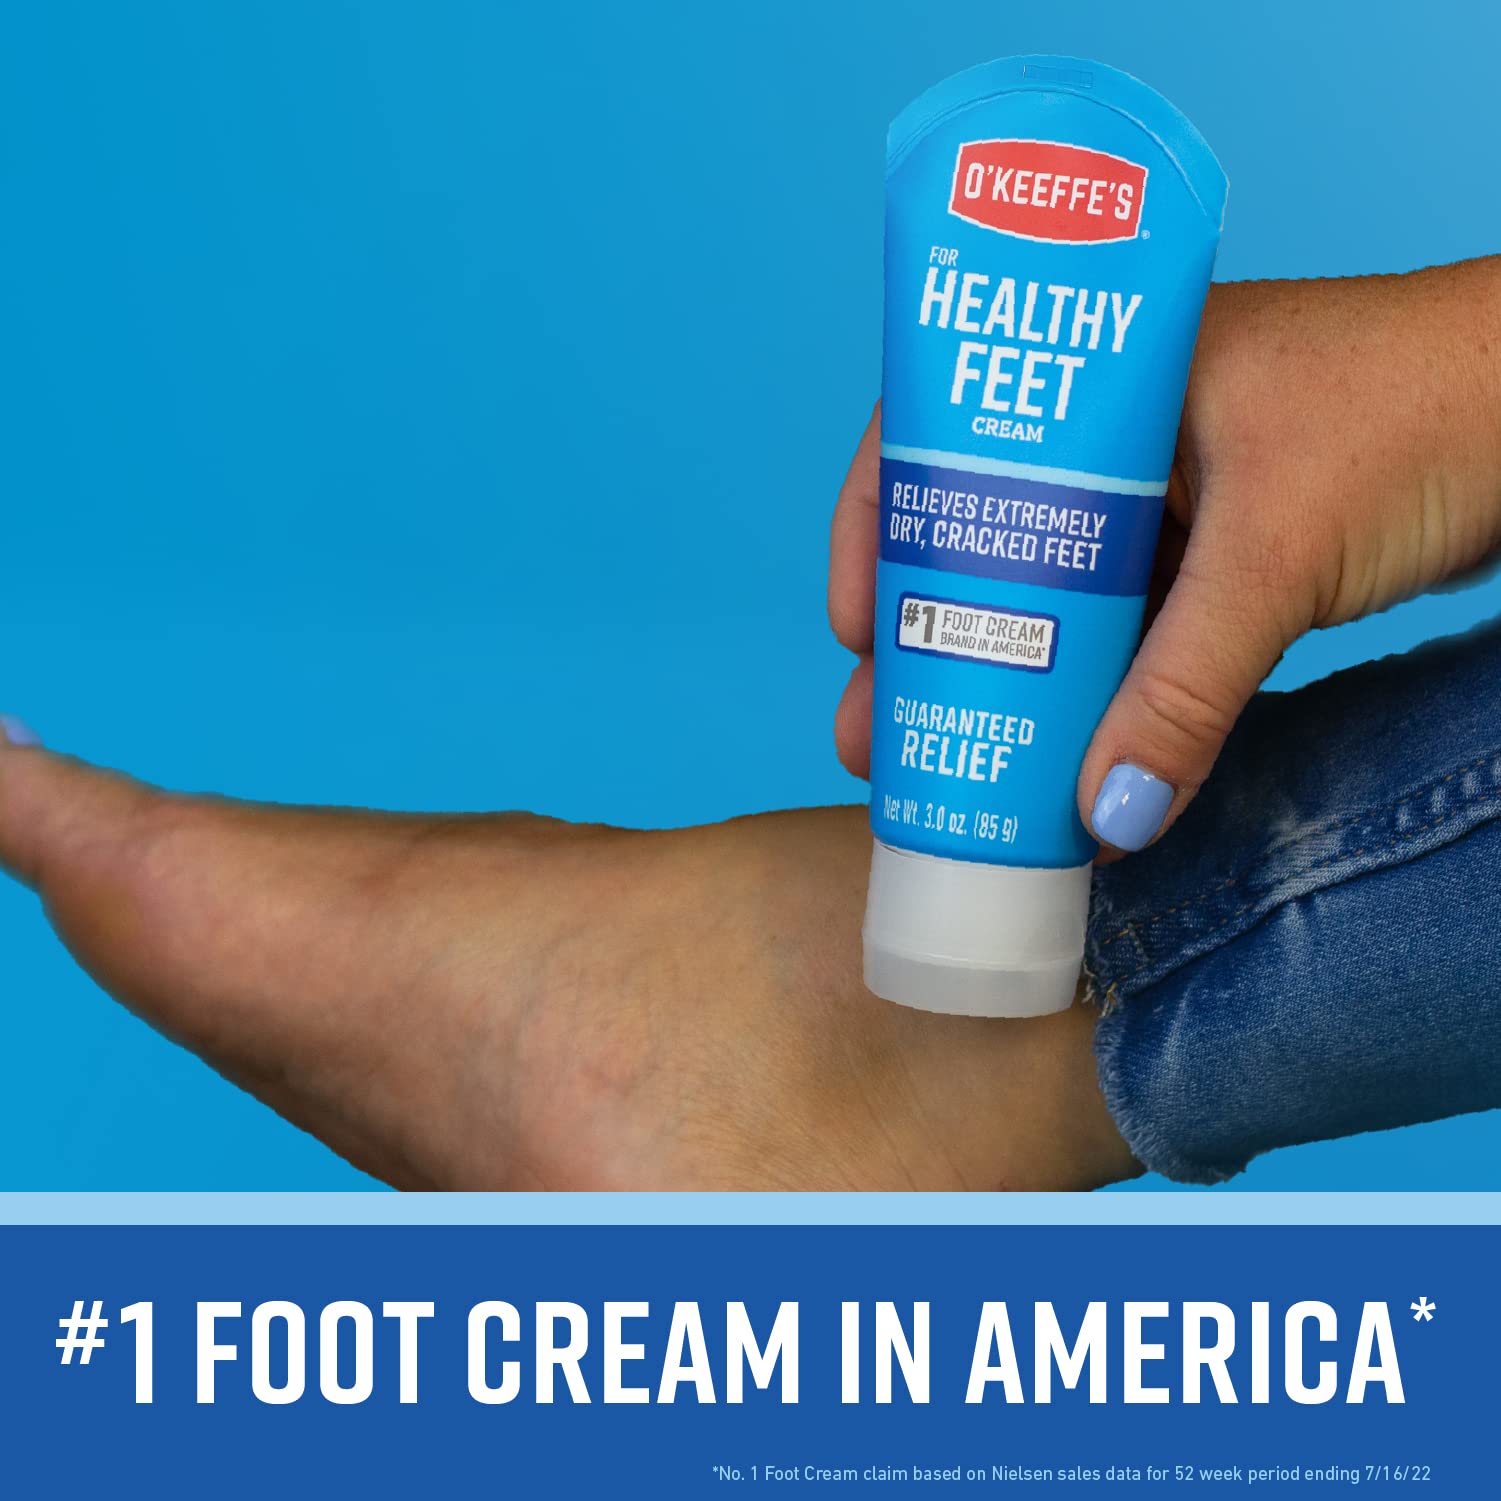 O'Keeffe's for Healthy Feet Foot Cream, Guaranteed Relief for Extremely Dry, Cracked Feet, Clinically Proven to Instantly Boost Moisture Levels, 3.0 Ounce Tube, (Pack of 1)